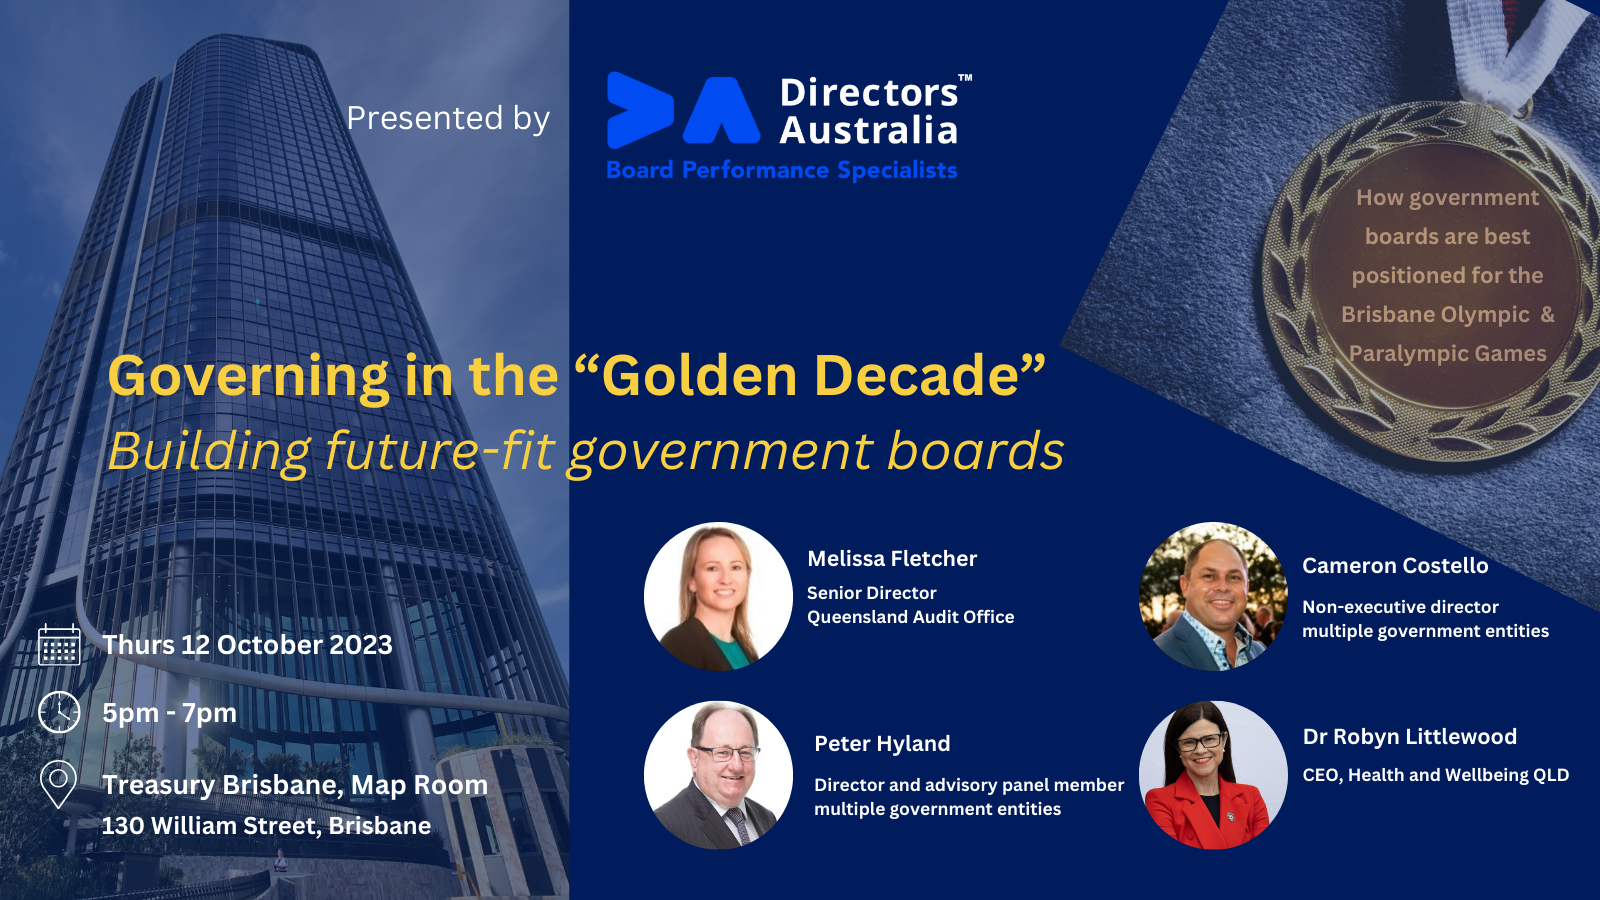 Invitation to attend in-person event presented by Directors Australia on Thursday 12 October 2023.